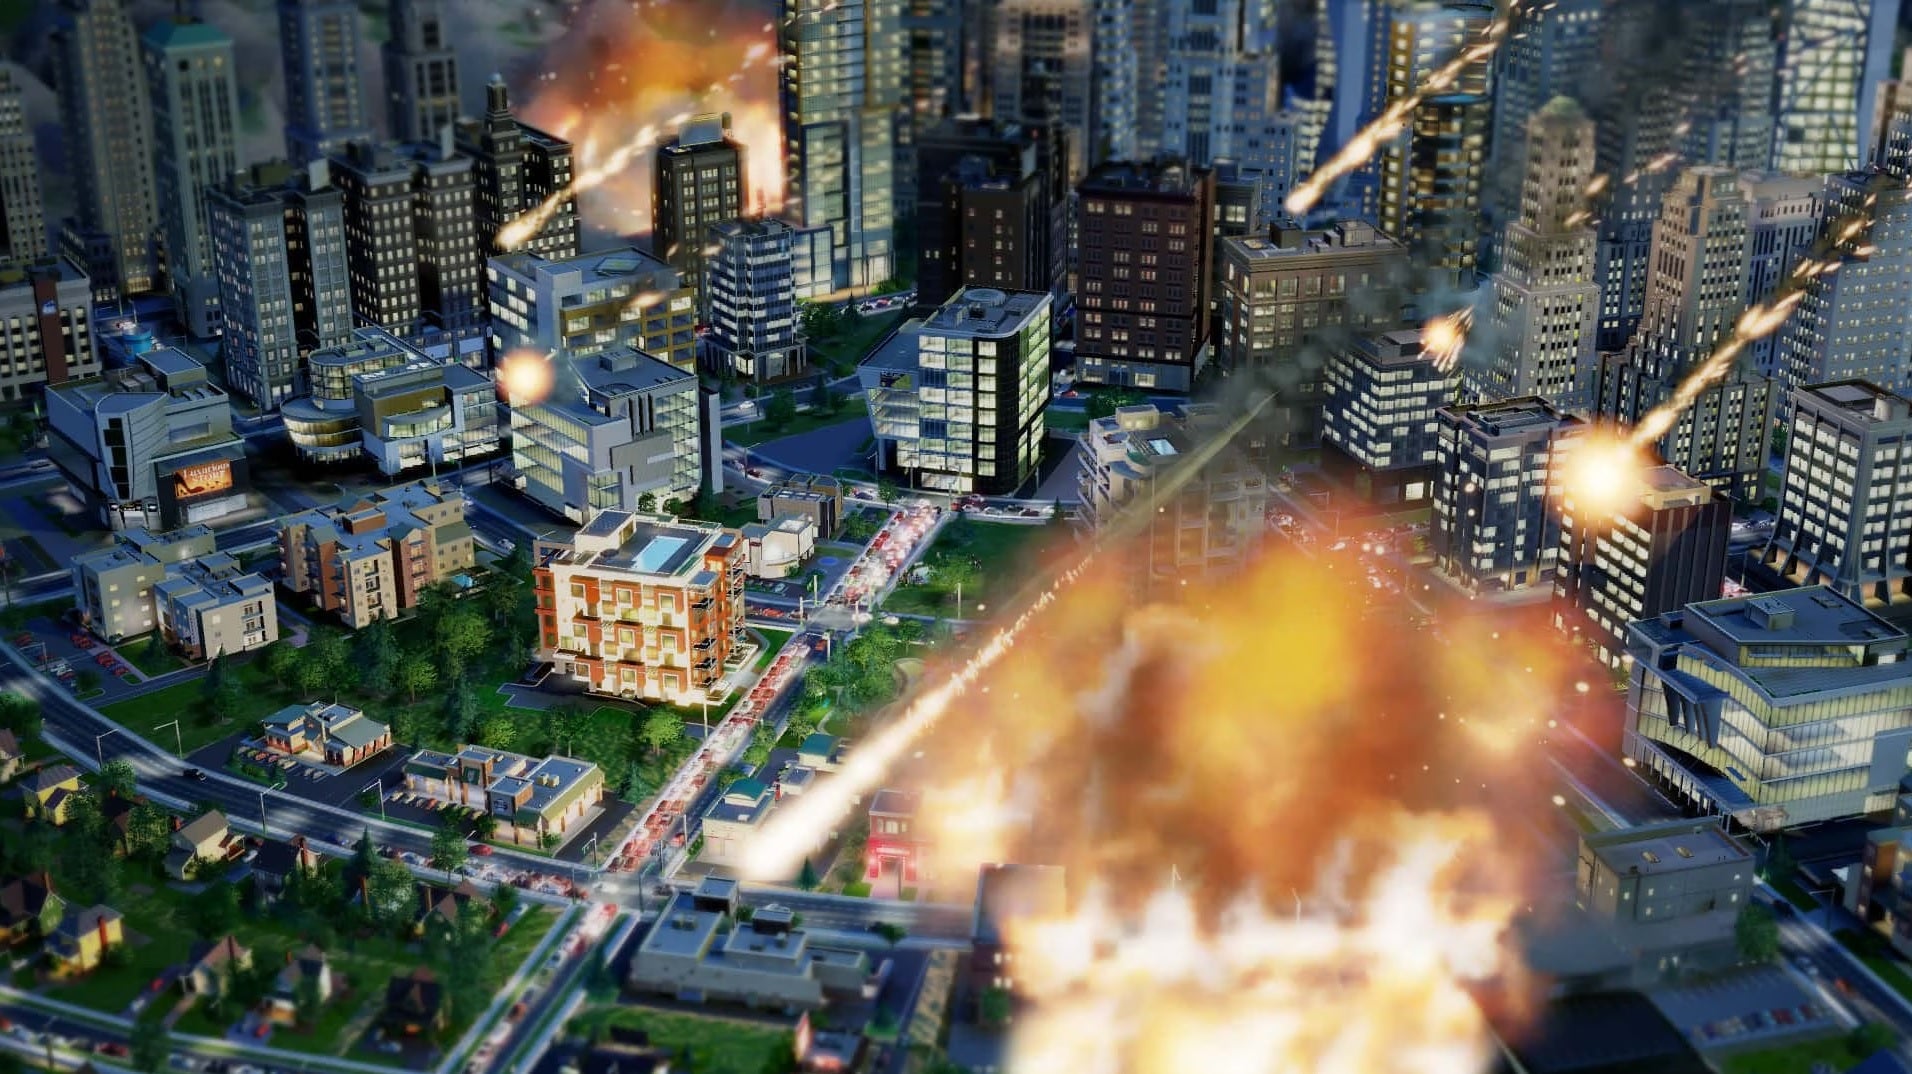 SimCity (2013) promo image showing meteors hitting a downtown area and setting it ablaze